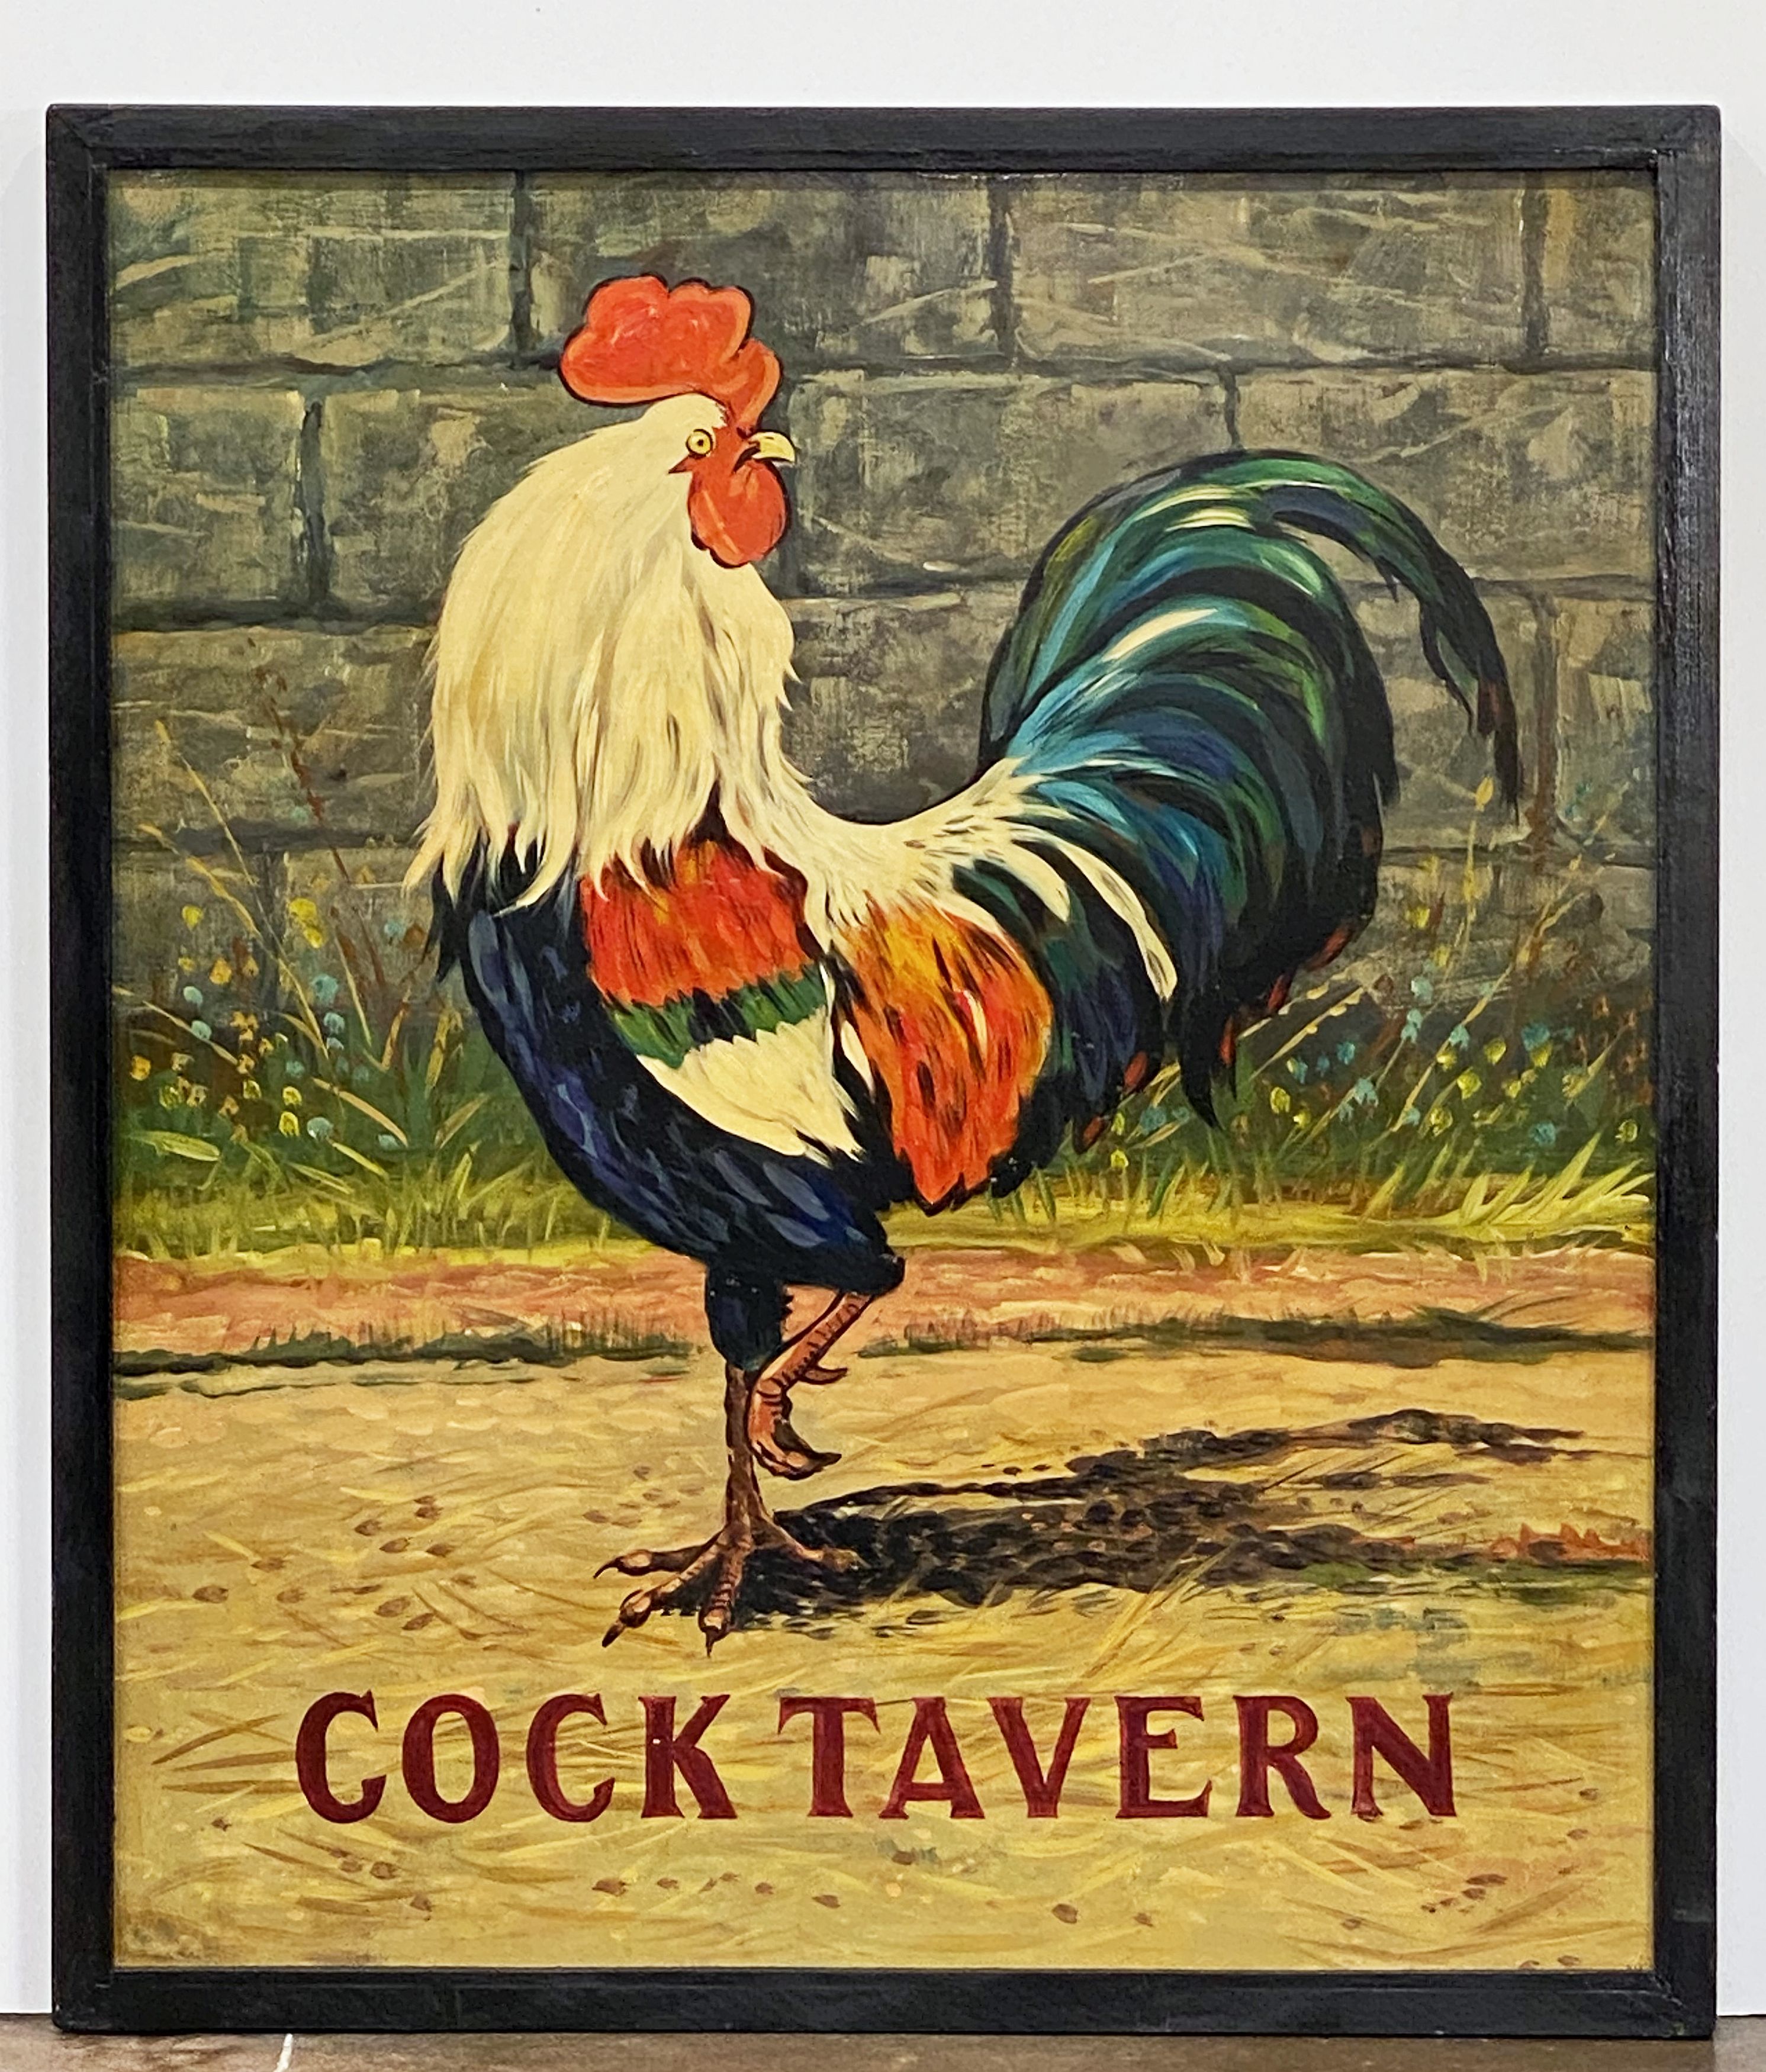 An authentic English pub sign (one-sided) featuring a painting of a cock or rooster, entitled: Cock Tavern

A very fine example of vintage advertising artwork and ready for display.